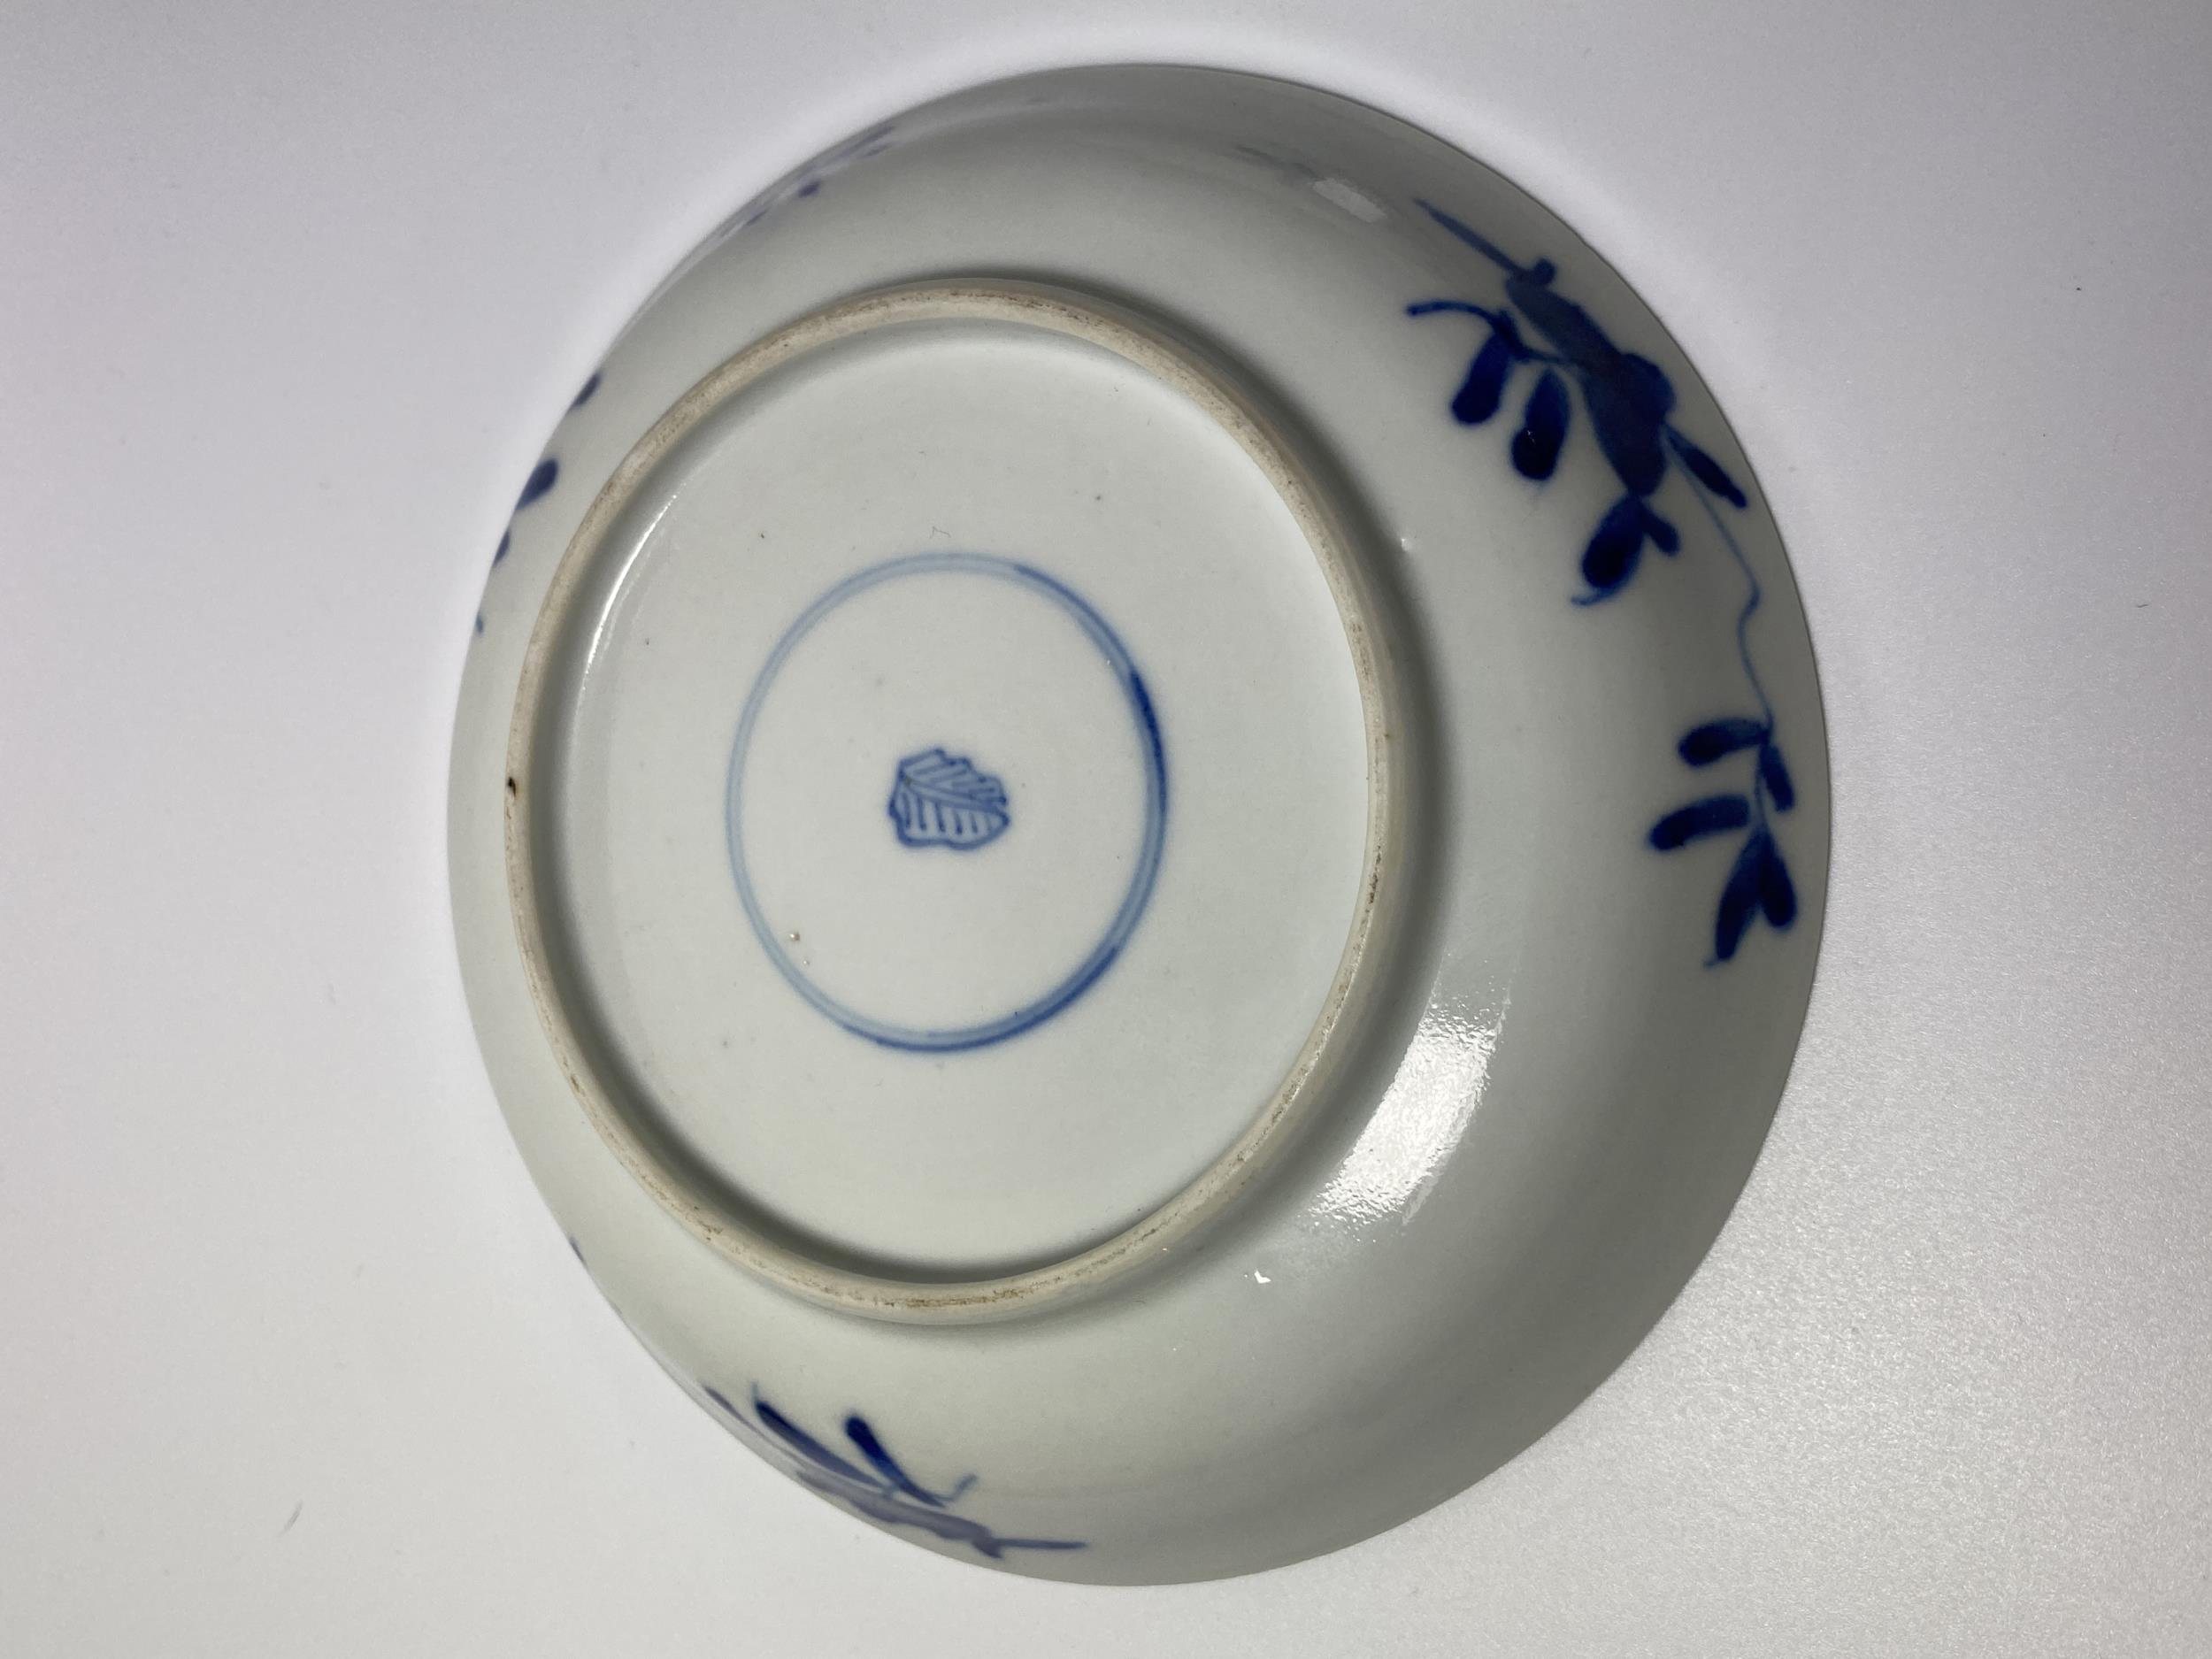 A PAIR OF KANGXI PERIOD (1661-1722) CHINESE BLUE AND WHITE PORCELAIN PLATES, ARTEMESIA LEAF MARK - Image 8 of 13